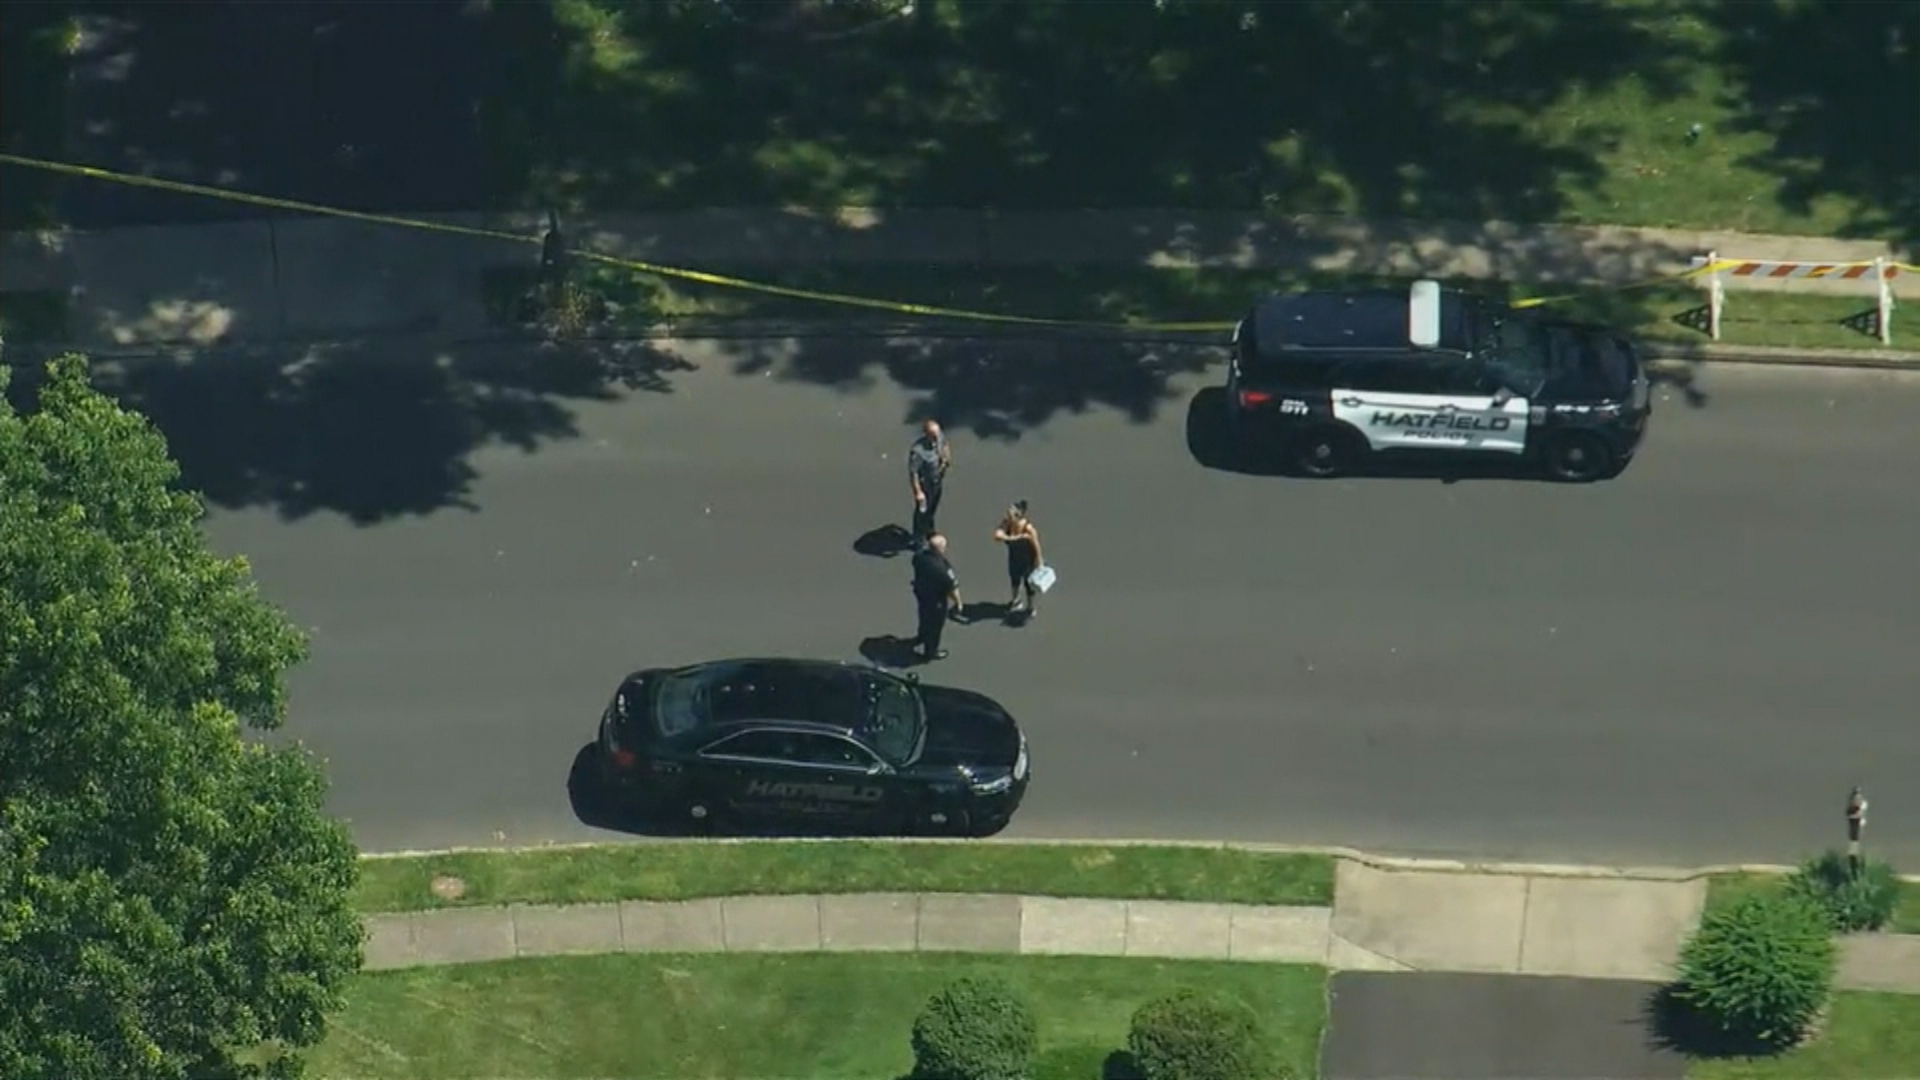 Officials Investigating Officer-Involved Shooting In Hatfield Township That Sent Man To Hospital